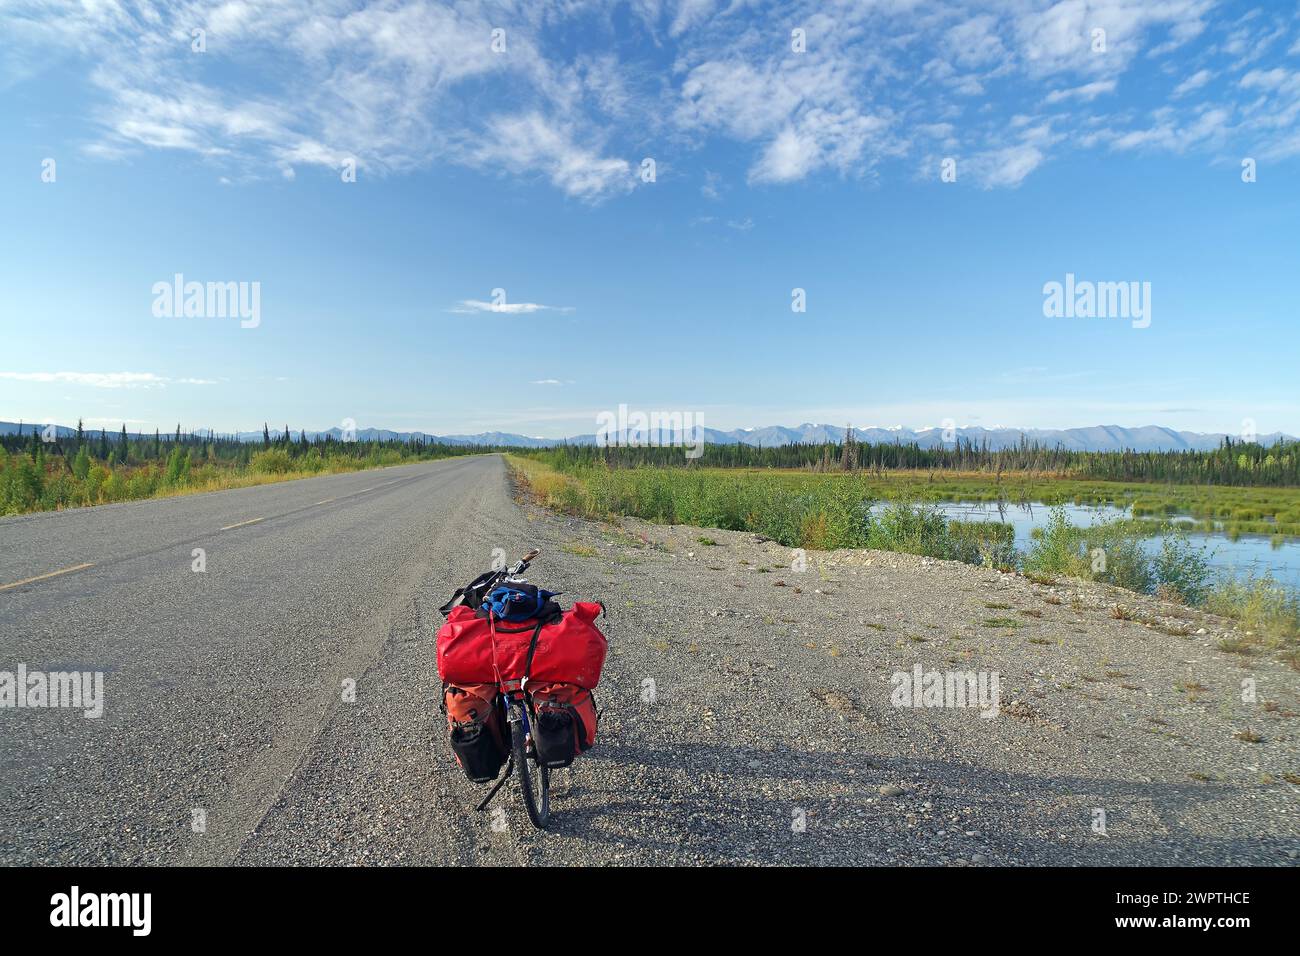 Bicycle standing on an endless straight road in the wilderness, bicycle tour, adventure trip, late summer, Alaska Highway, Yukon TerritoryCanada Stock Photo